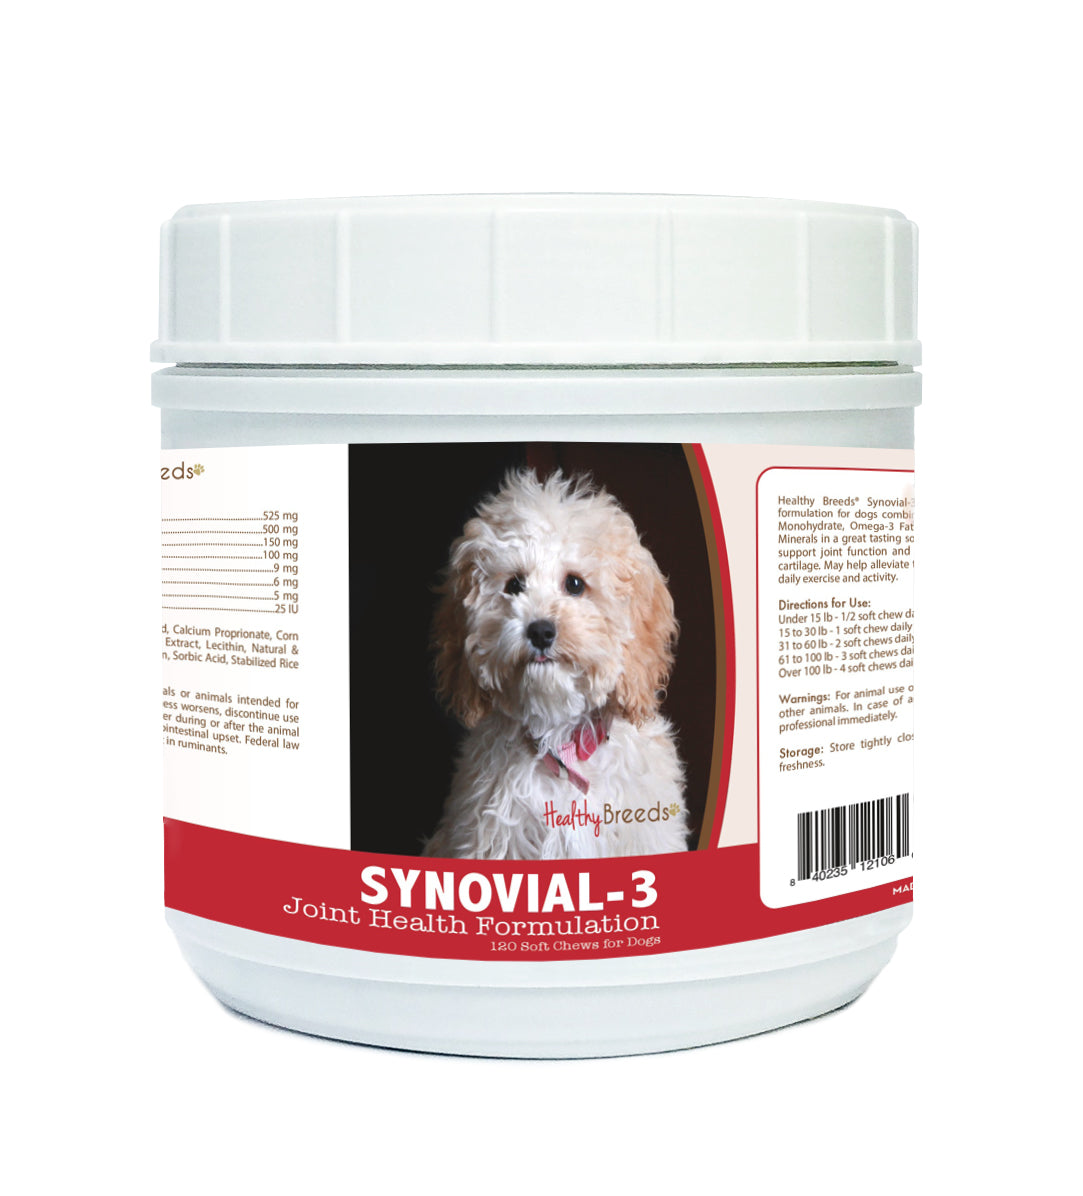 Cockapoo Synovial-3 Joint Health Formulation Soft Chews 120 Count